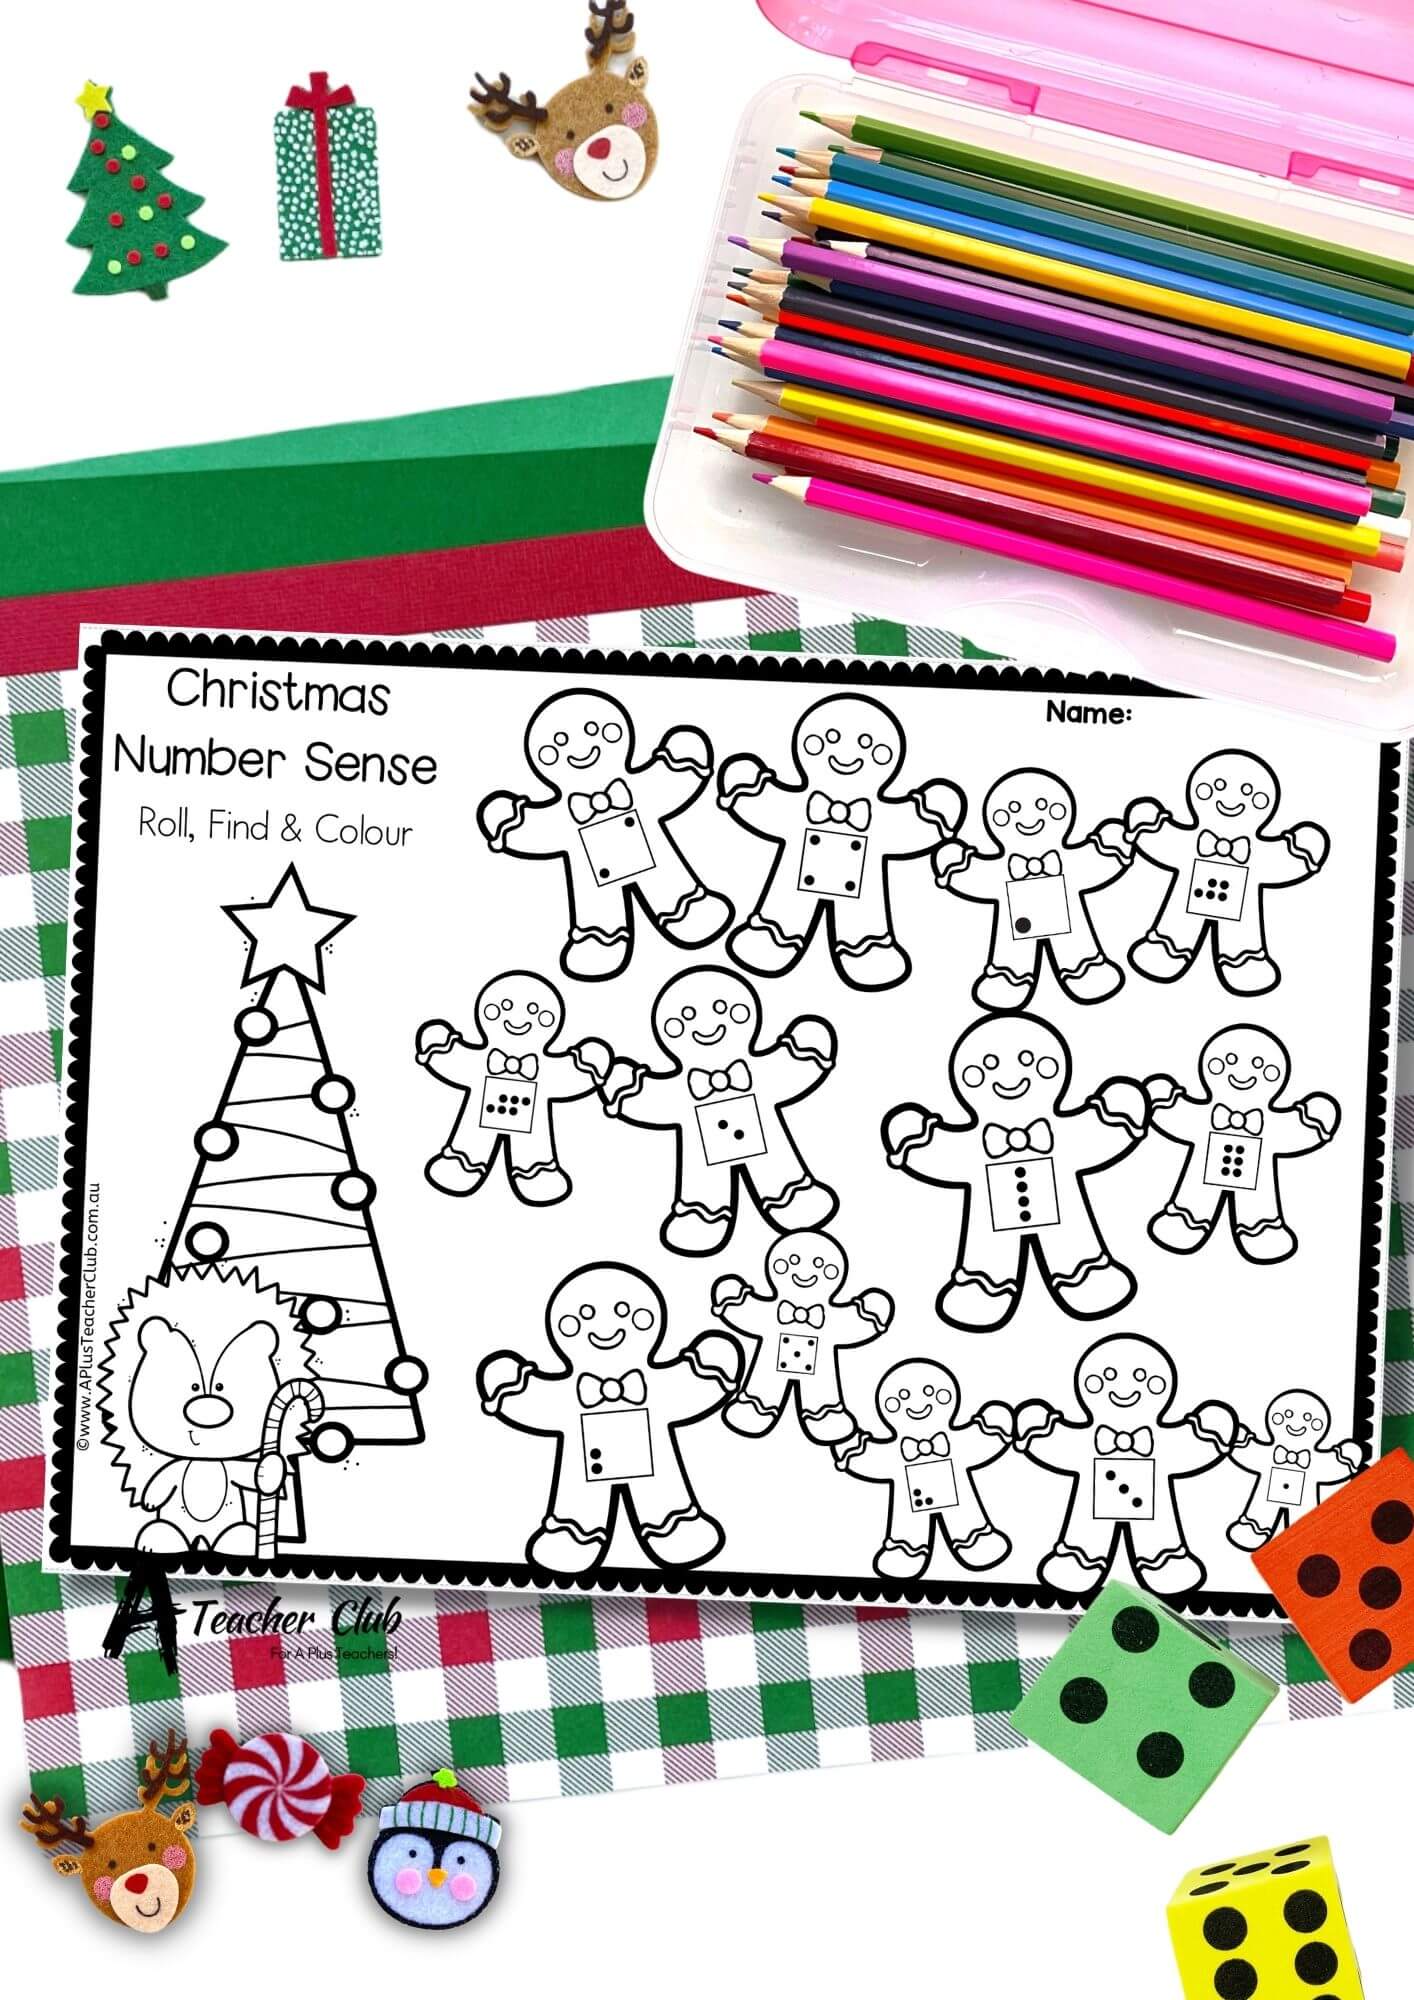 Christmas Roll Find Cover Number Sense Booklet 1-12